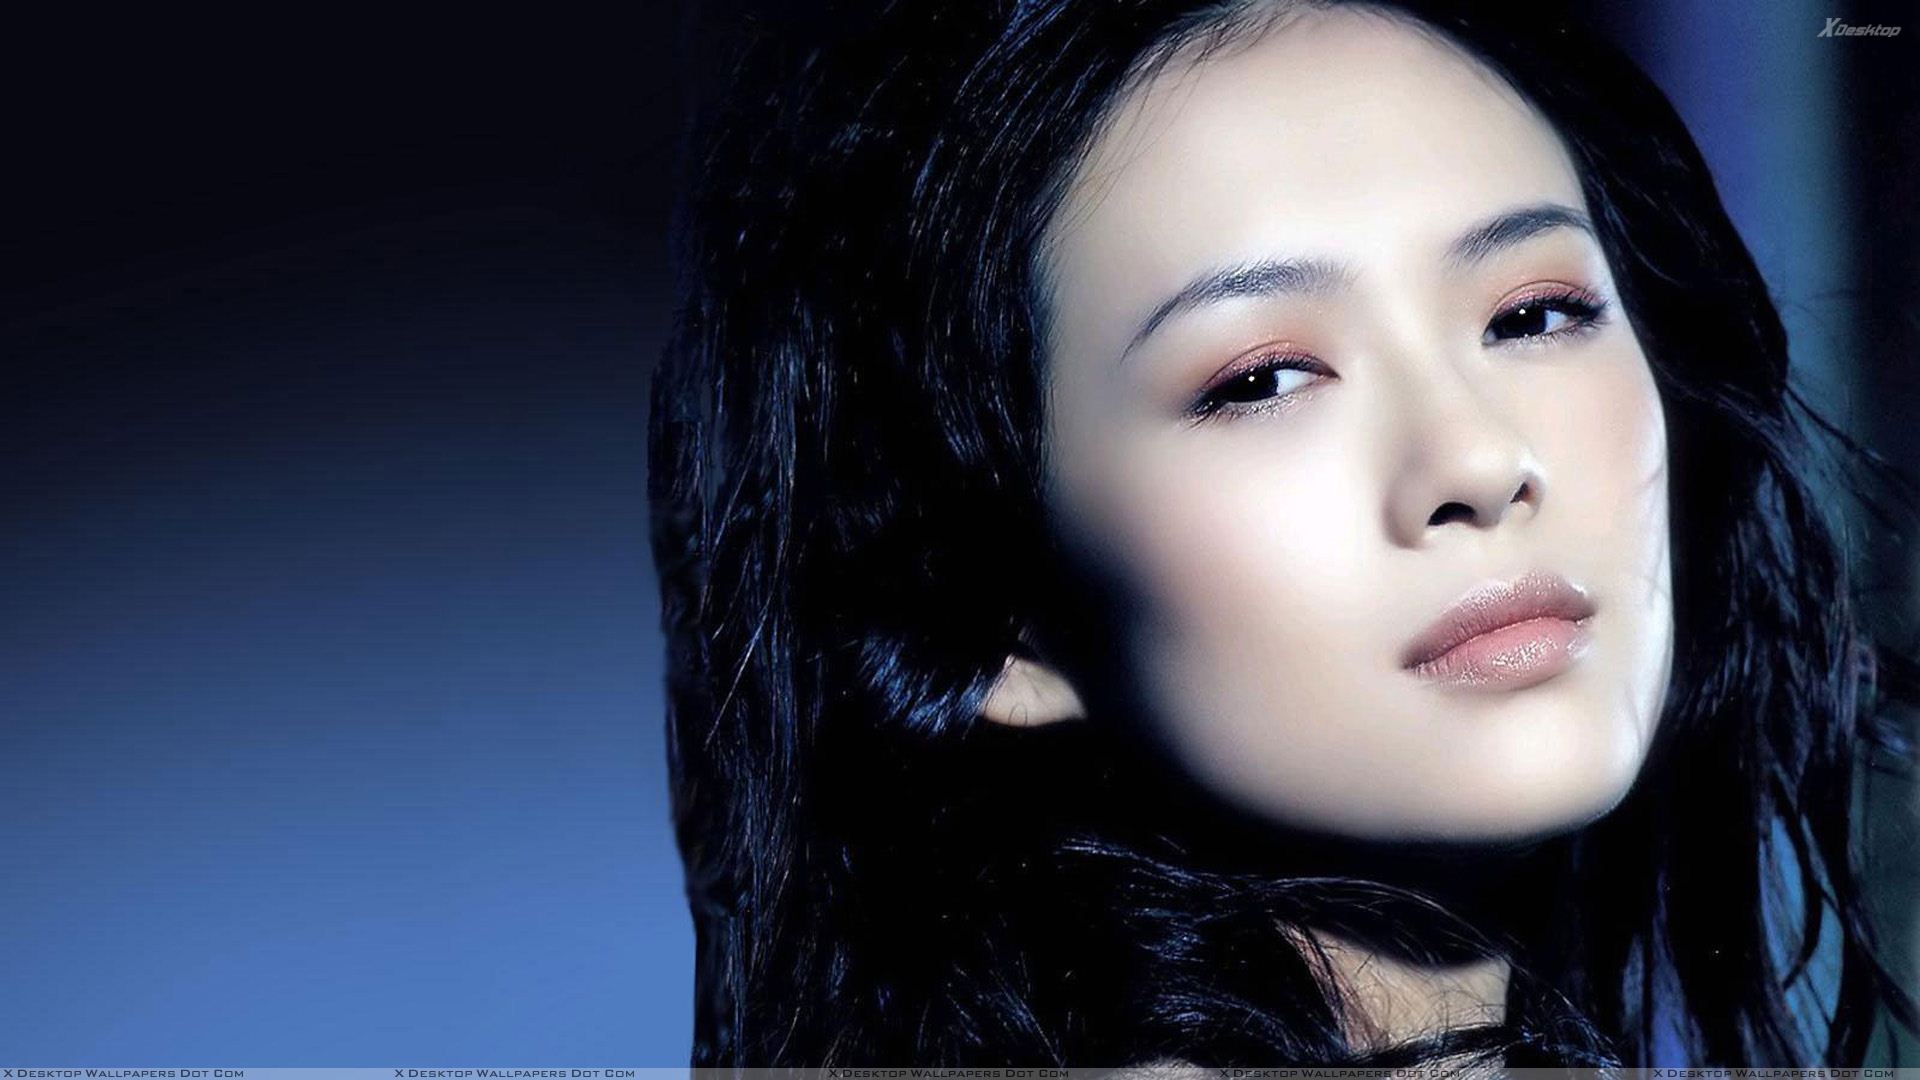 Zhang Ziyi Wallpapers, Photos & Images in HD